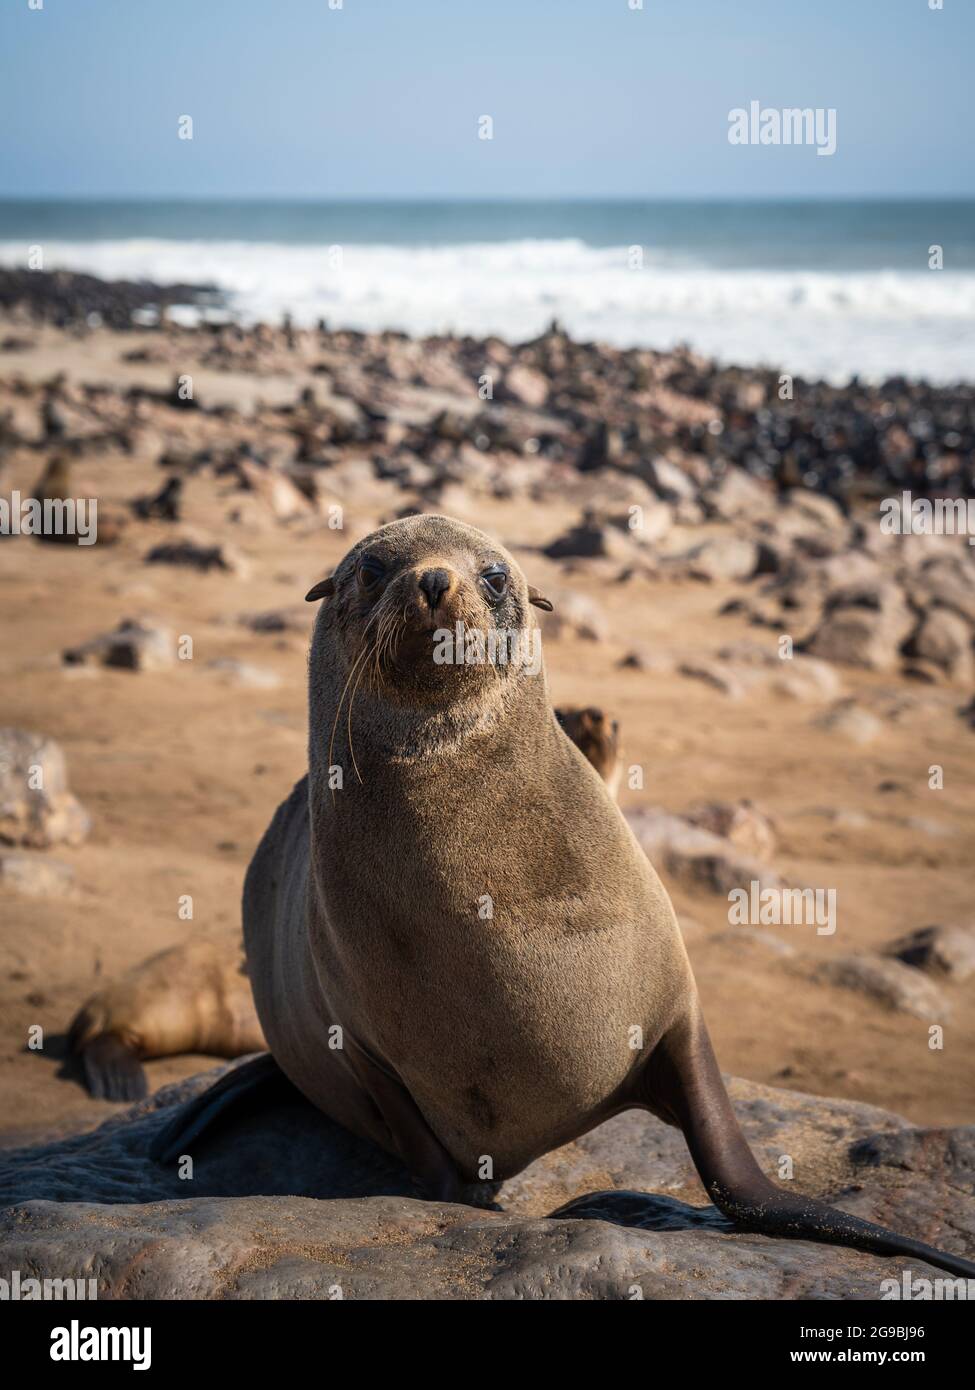 Seals at the Cape Cross Seal Reserve on the Skeleton Coast, Namibia. Cape Cross is home to one of the largest colonies of Cape fur seals in the world. Stock Photo